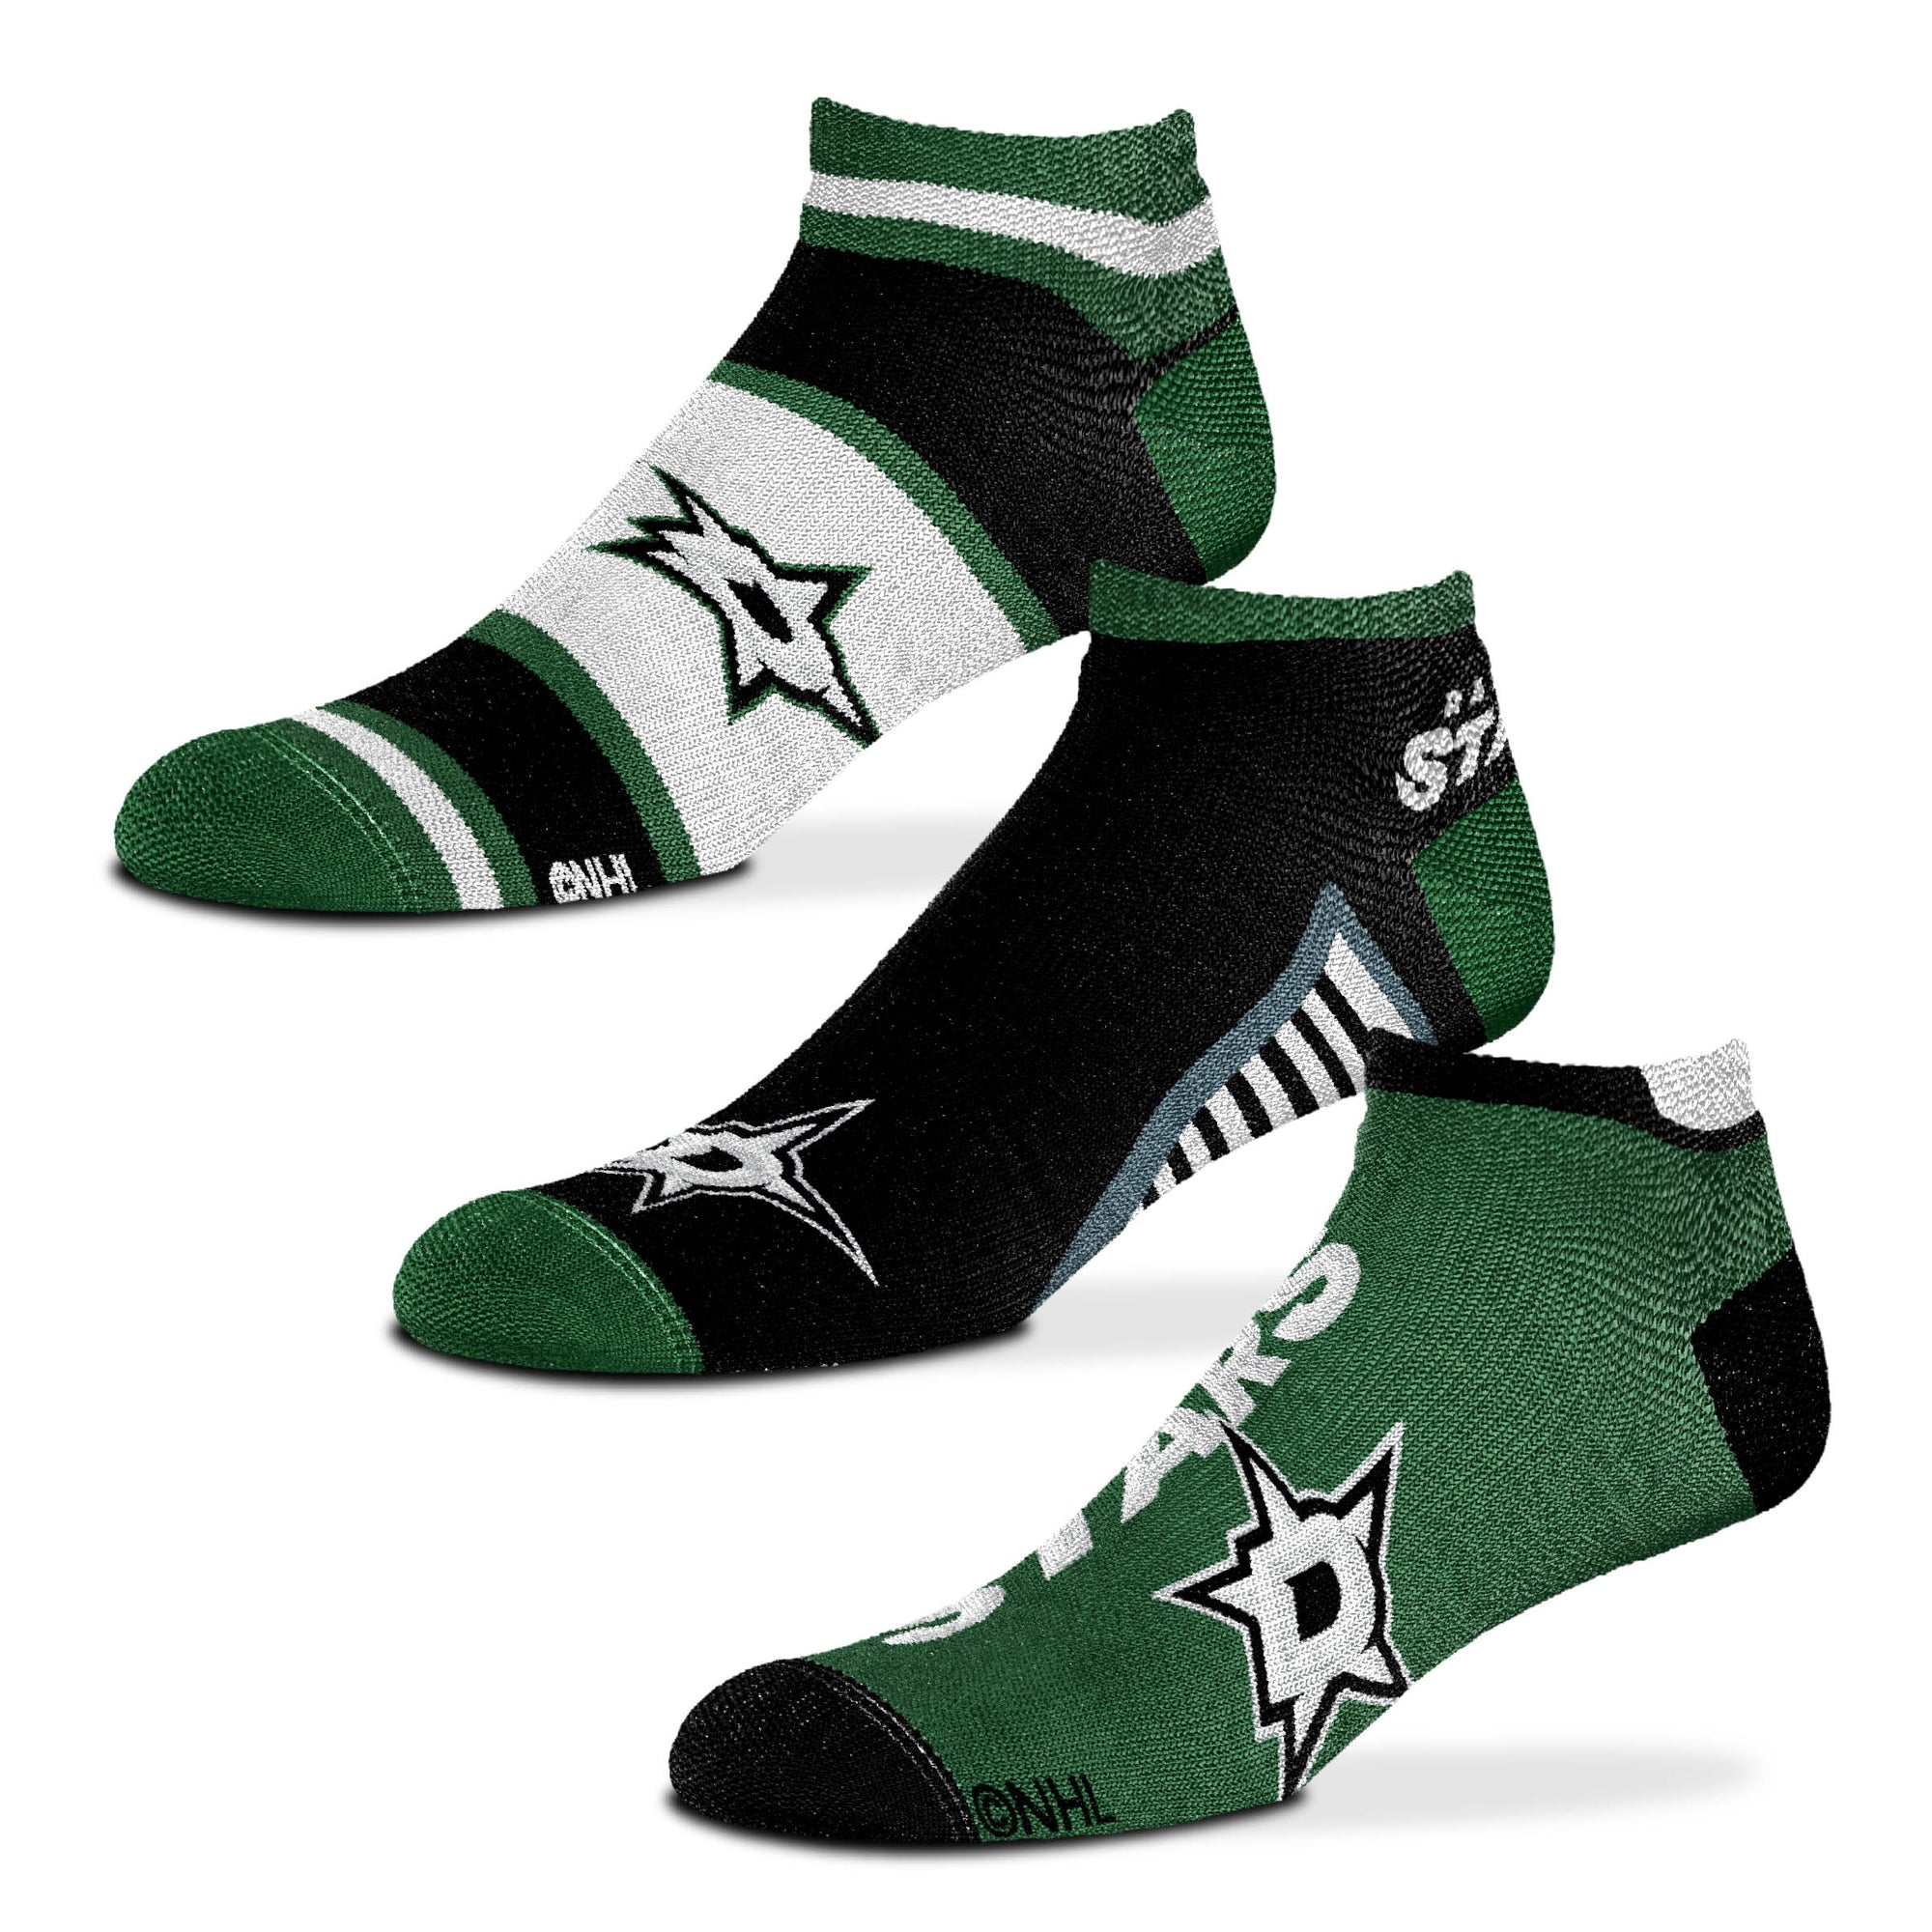 Dallas Star - Show Me The Money (3 Pack)